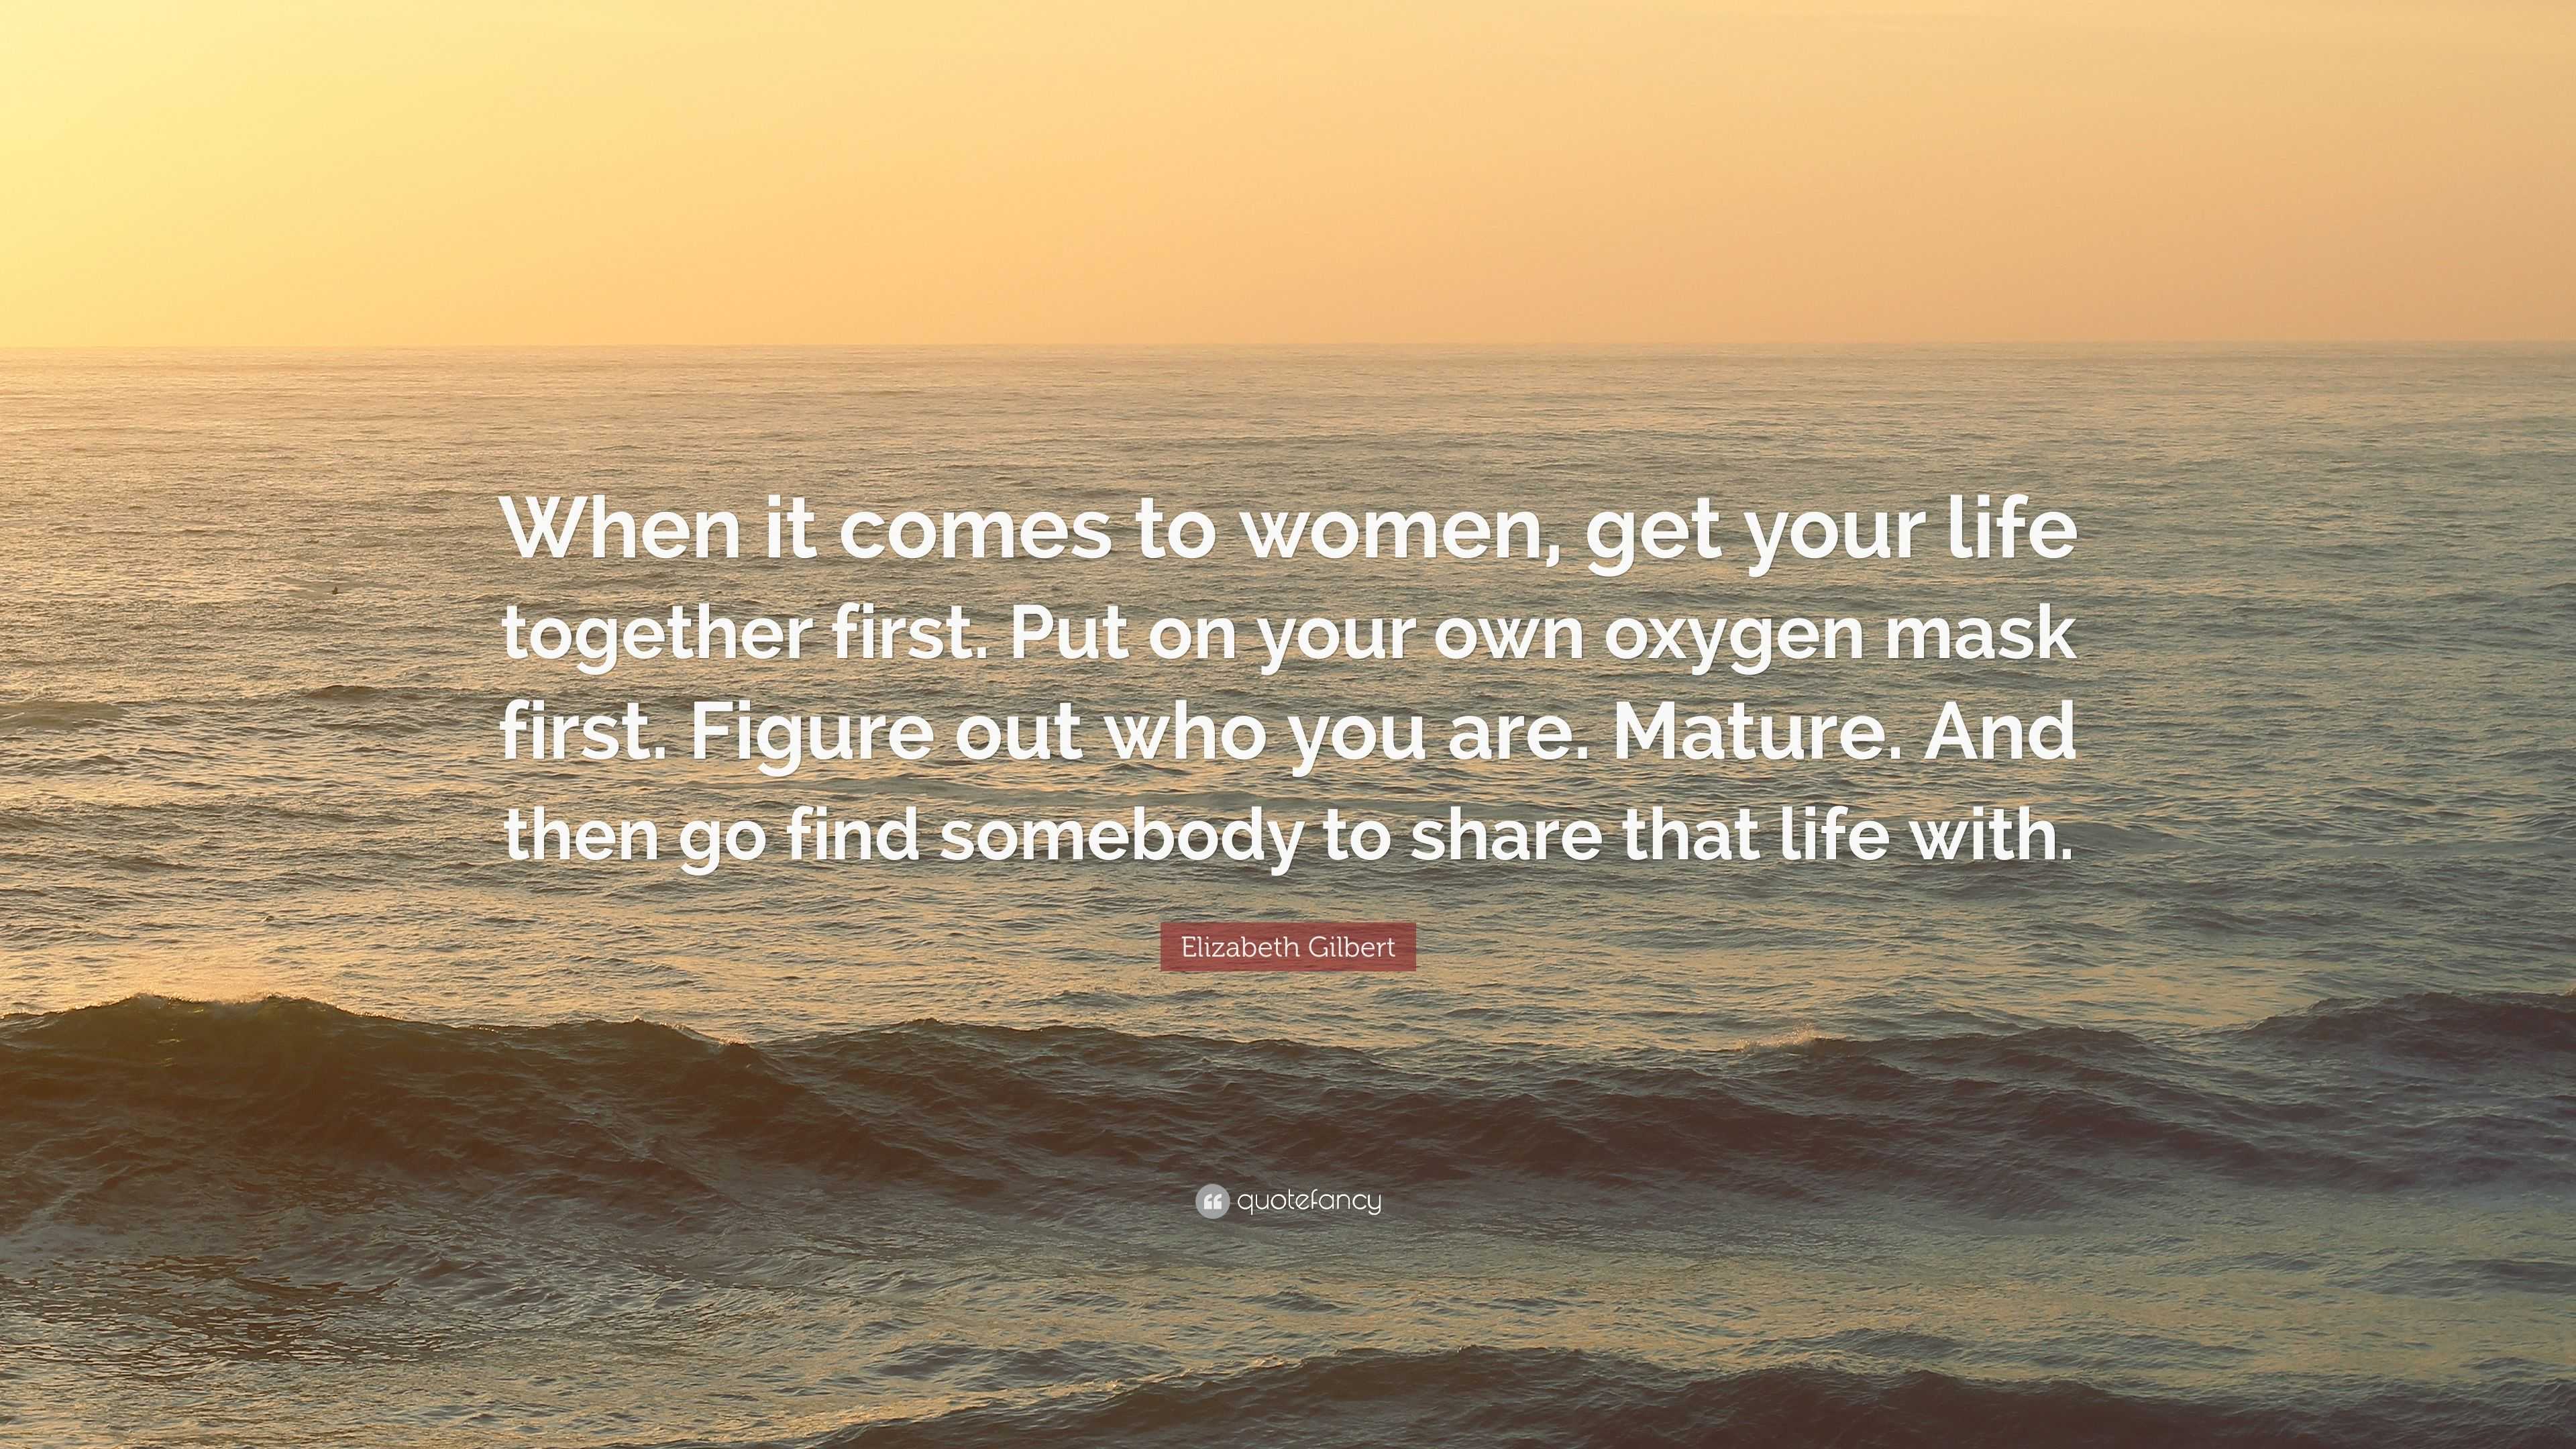 Elizabeth Gilbert Quote “When it comes to women, get your life